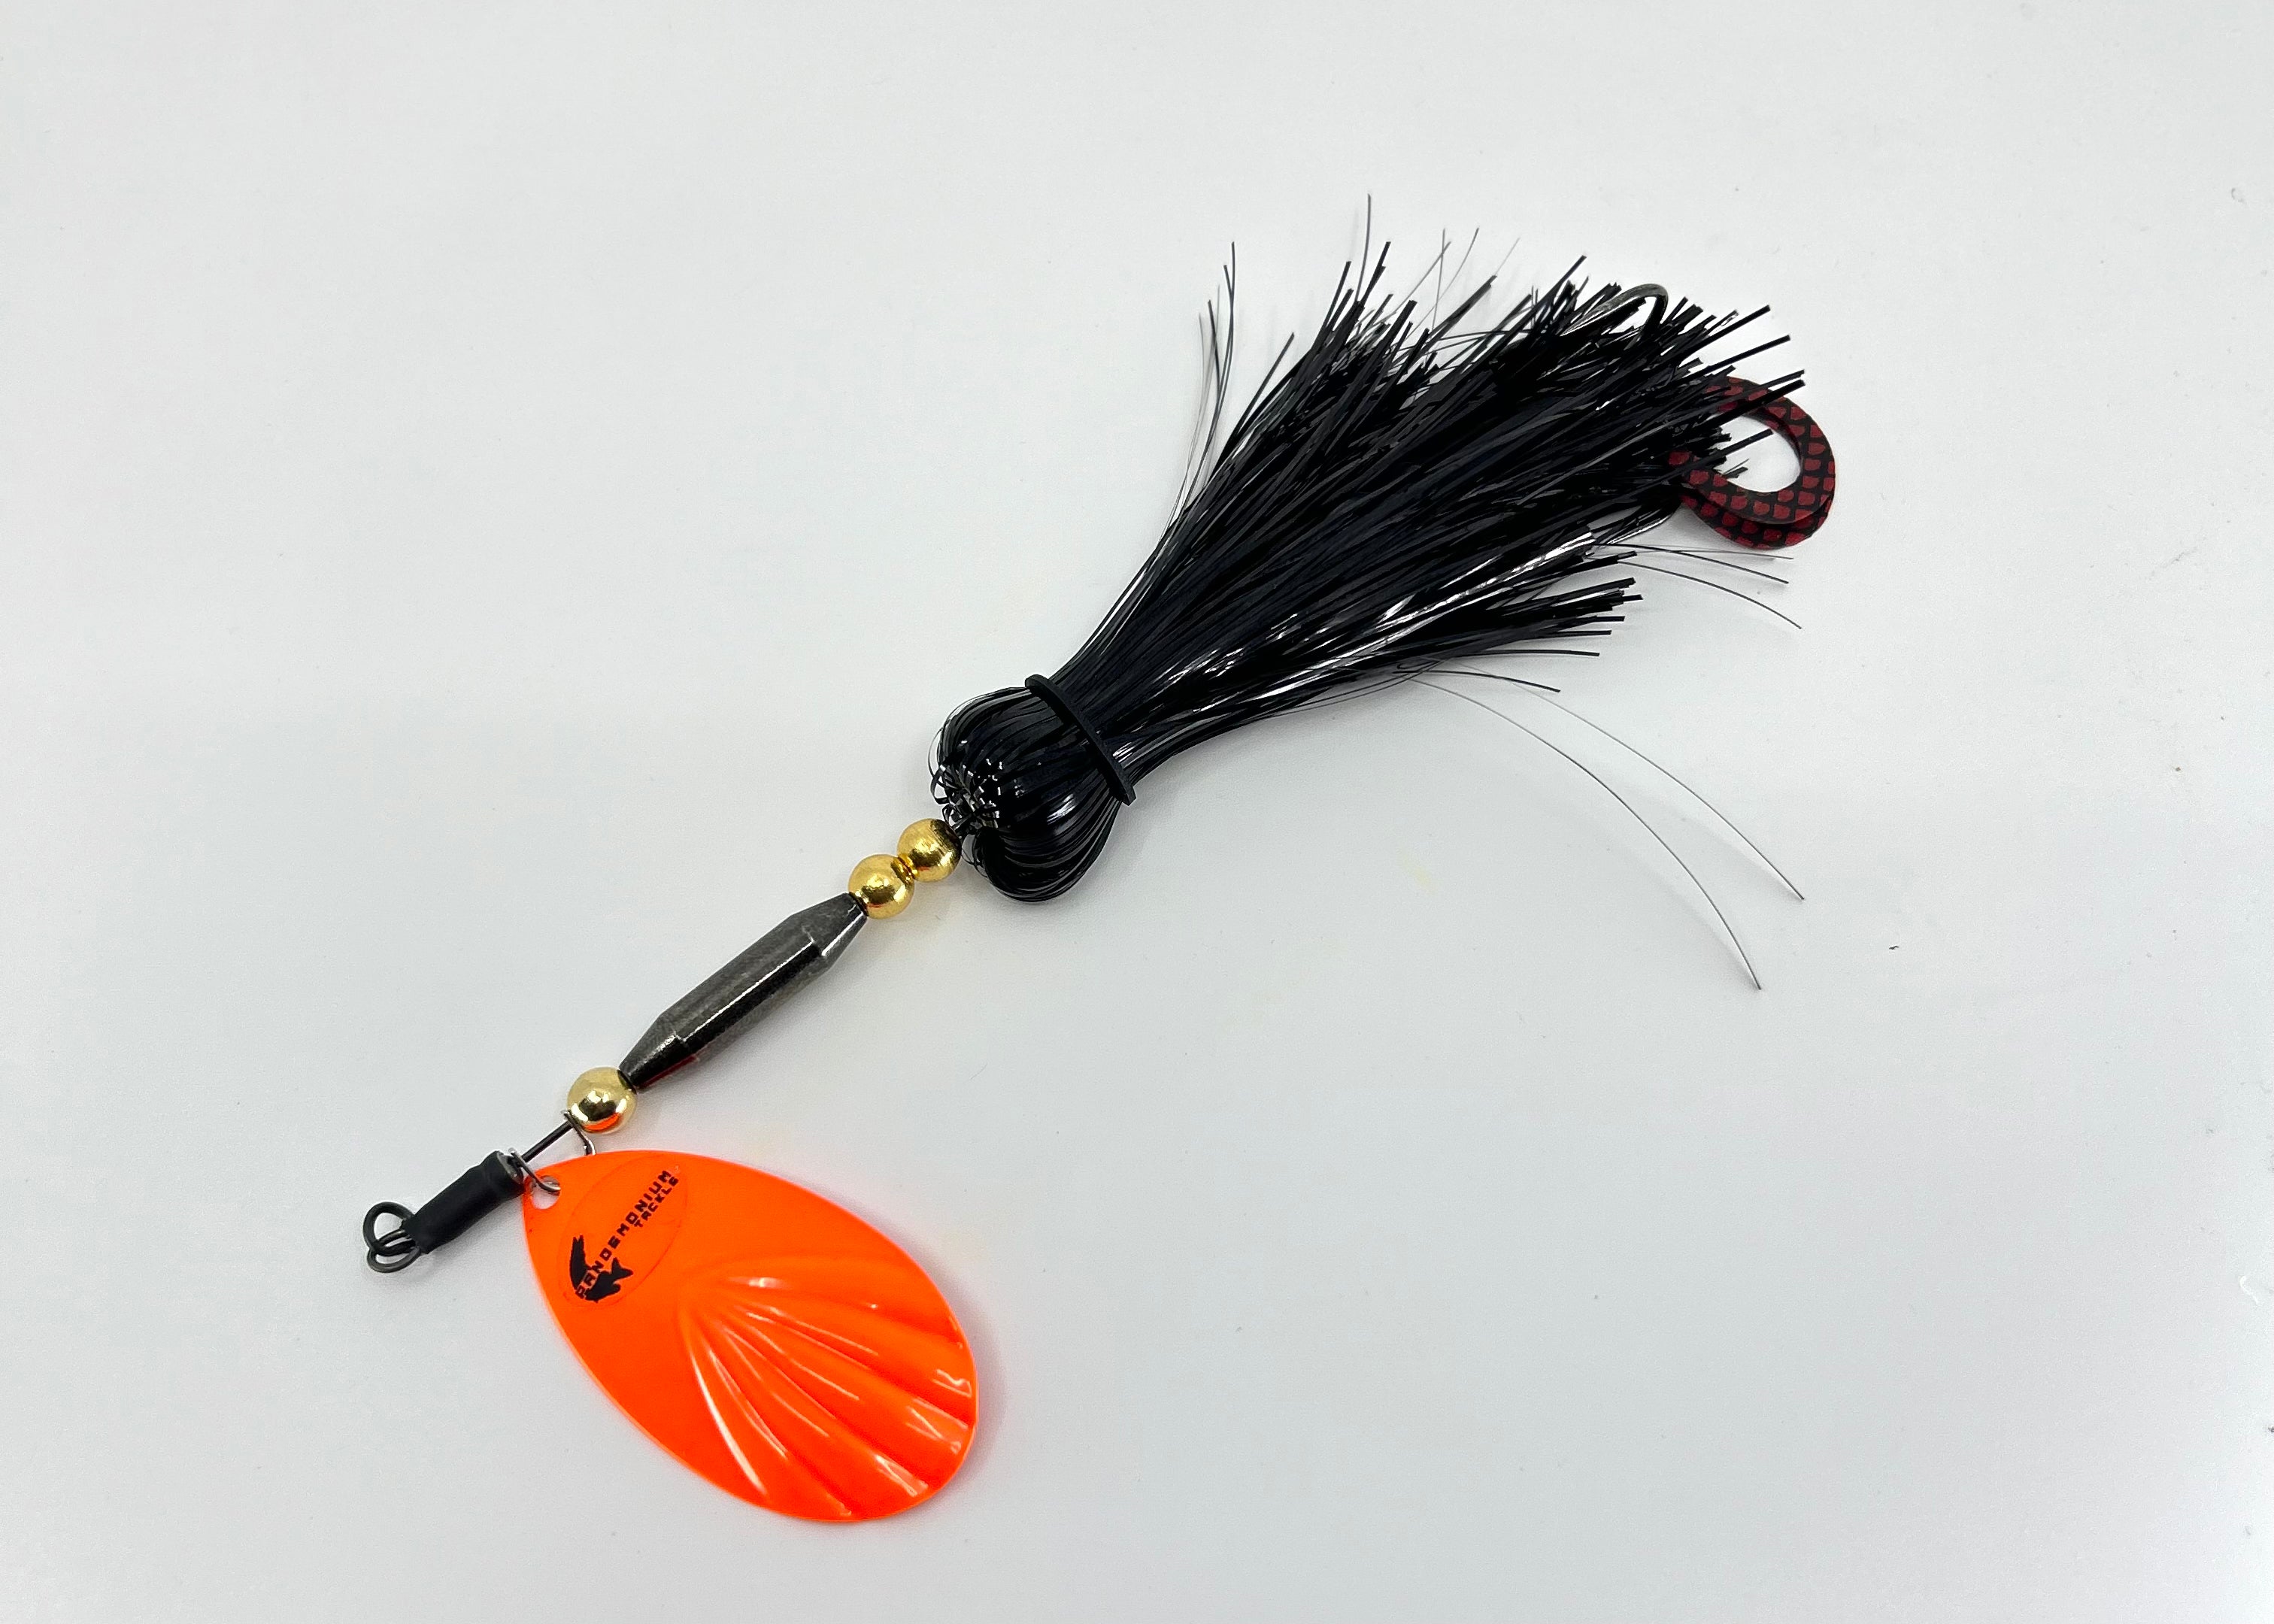 Pandemonium Tackle  Marvin Single 8 FLASH – Taps and Tackle Co.